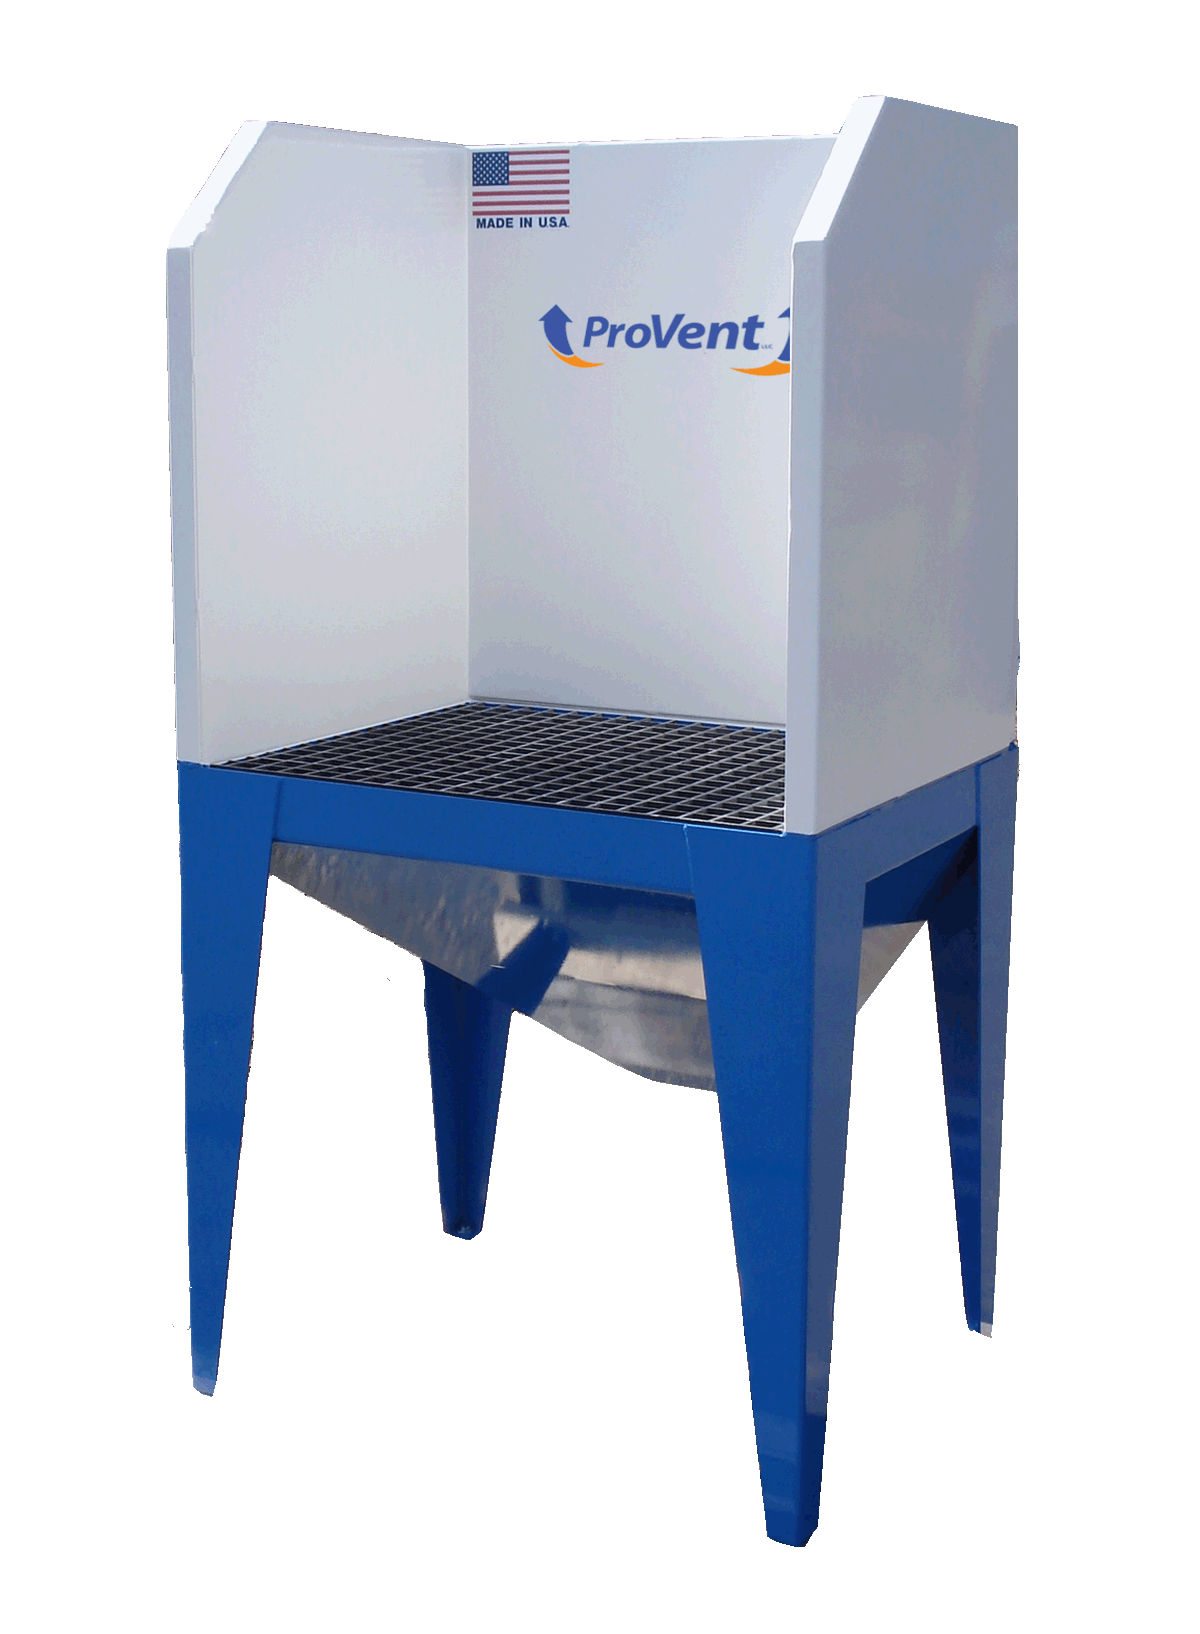 Ventilated work bench with ProVent logo on back panel